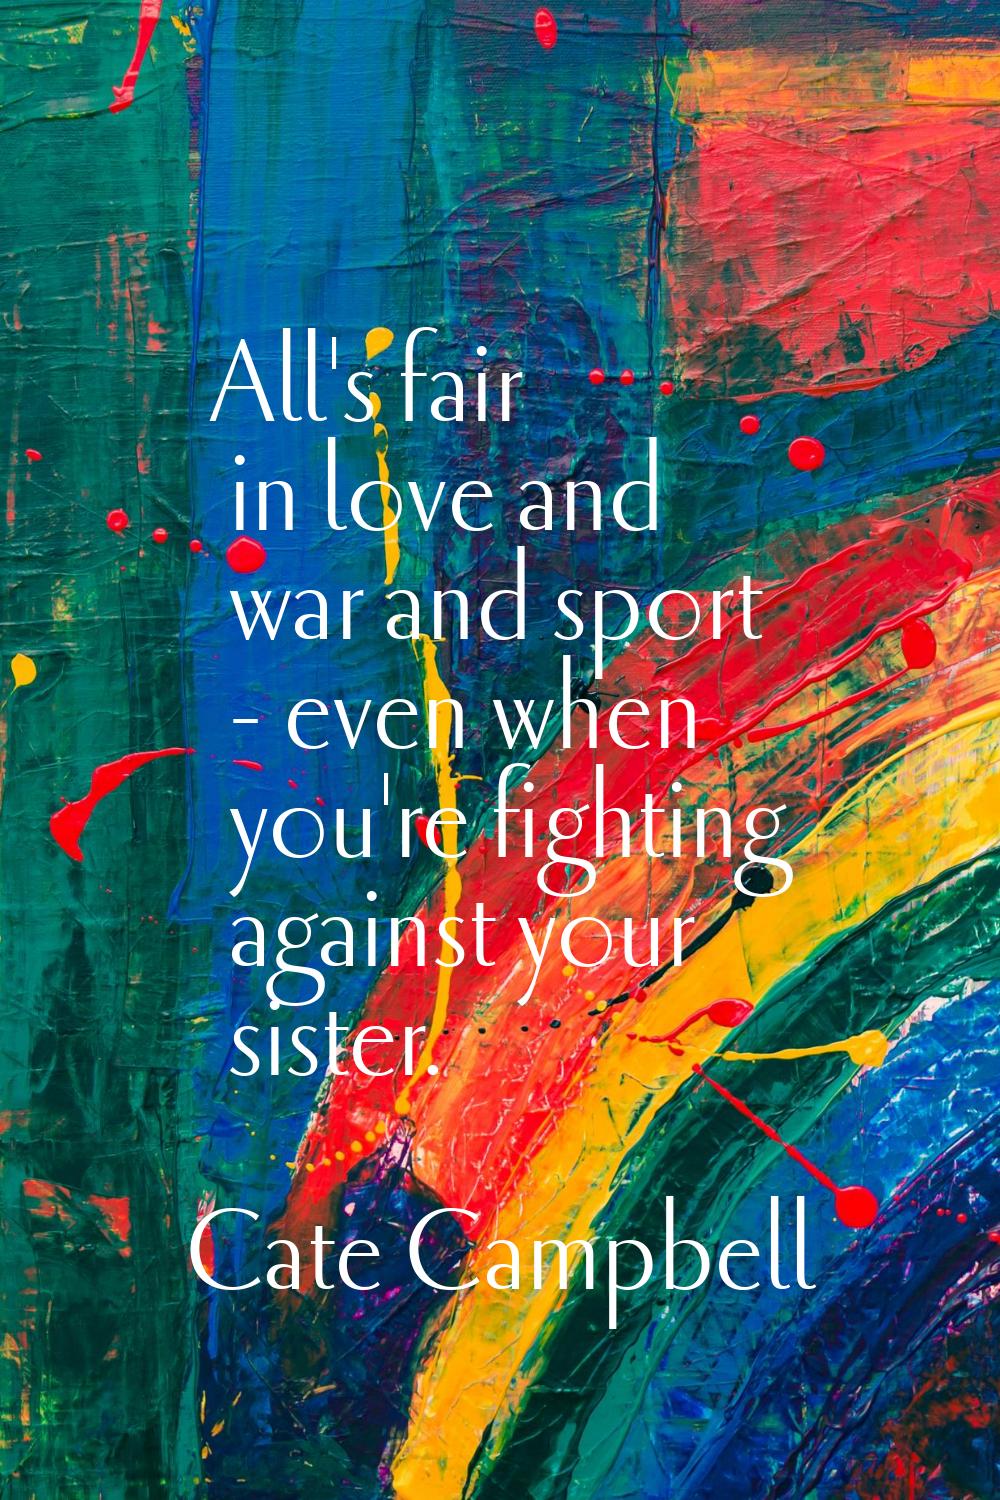 All's fair in love and war and sport - even when you're fighting against your sister.